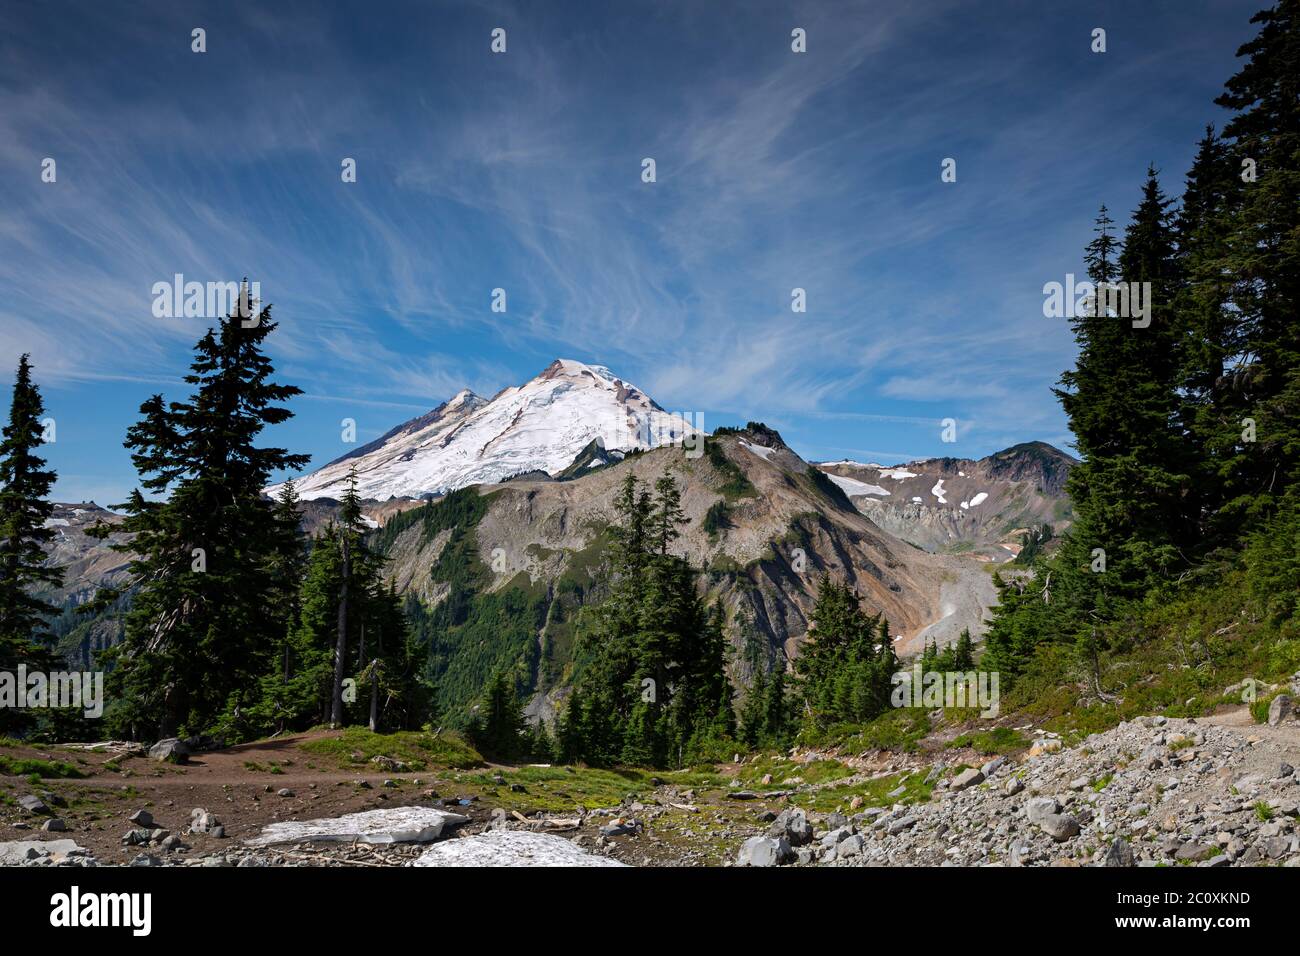 WA16720-00...WASHINGTON - Mount Baker viewed from Artist Point in Heather Meadows Recreation Area of Mount Baker - Snoqualmie National Forest. Stock Photo